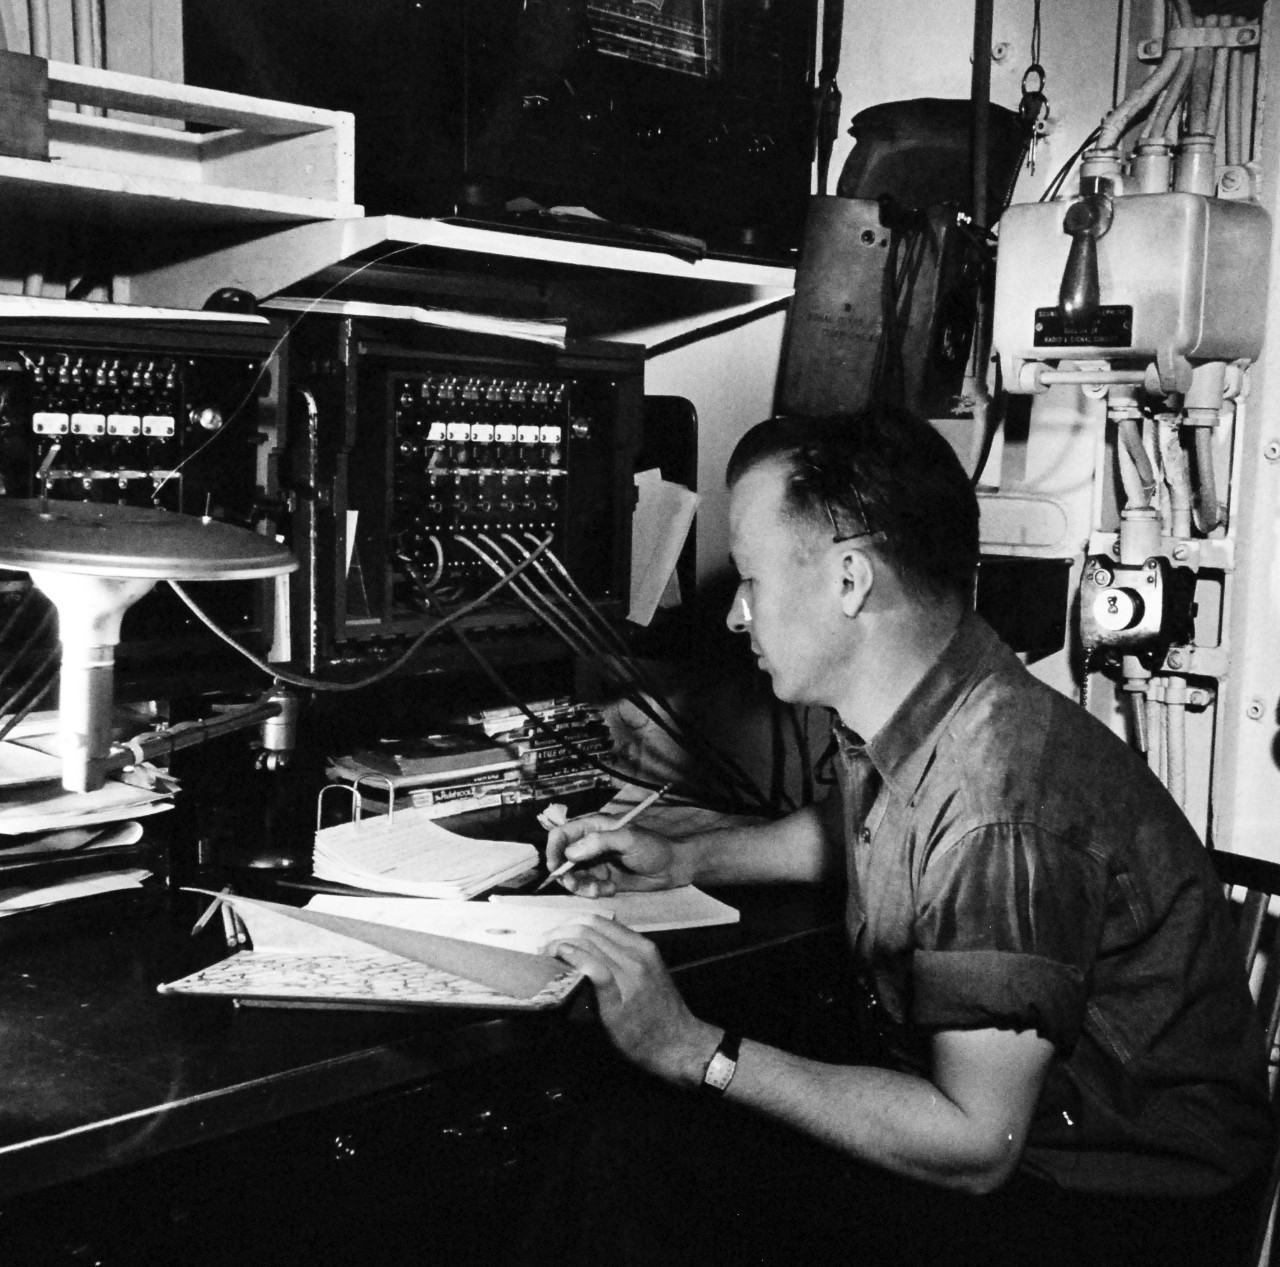 80-G-475698:  Aleutian Islands Campaign, June 1942 - August 1943.  Battle of Attu, May 11-29, 1943.  Telephone switchboard on USS Casco (AVP-12) serves as headquarters for all communication on Attu. Photographed released by the Steichen Photographic Unit:  Lieutenant Commander Horace Bristol, July 1943.    TR-5262.   U.S. Navy photograph, now in the collections of the National Archives.  (2015/11/17).